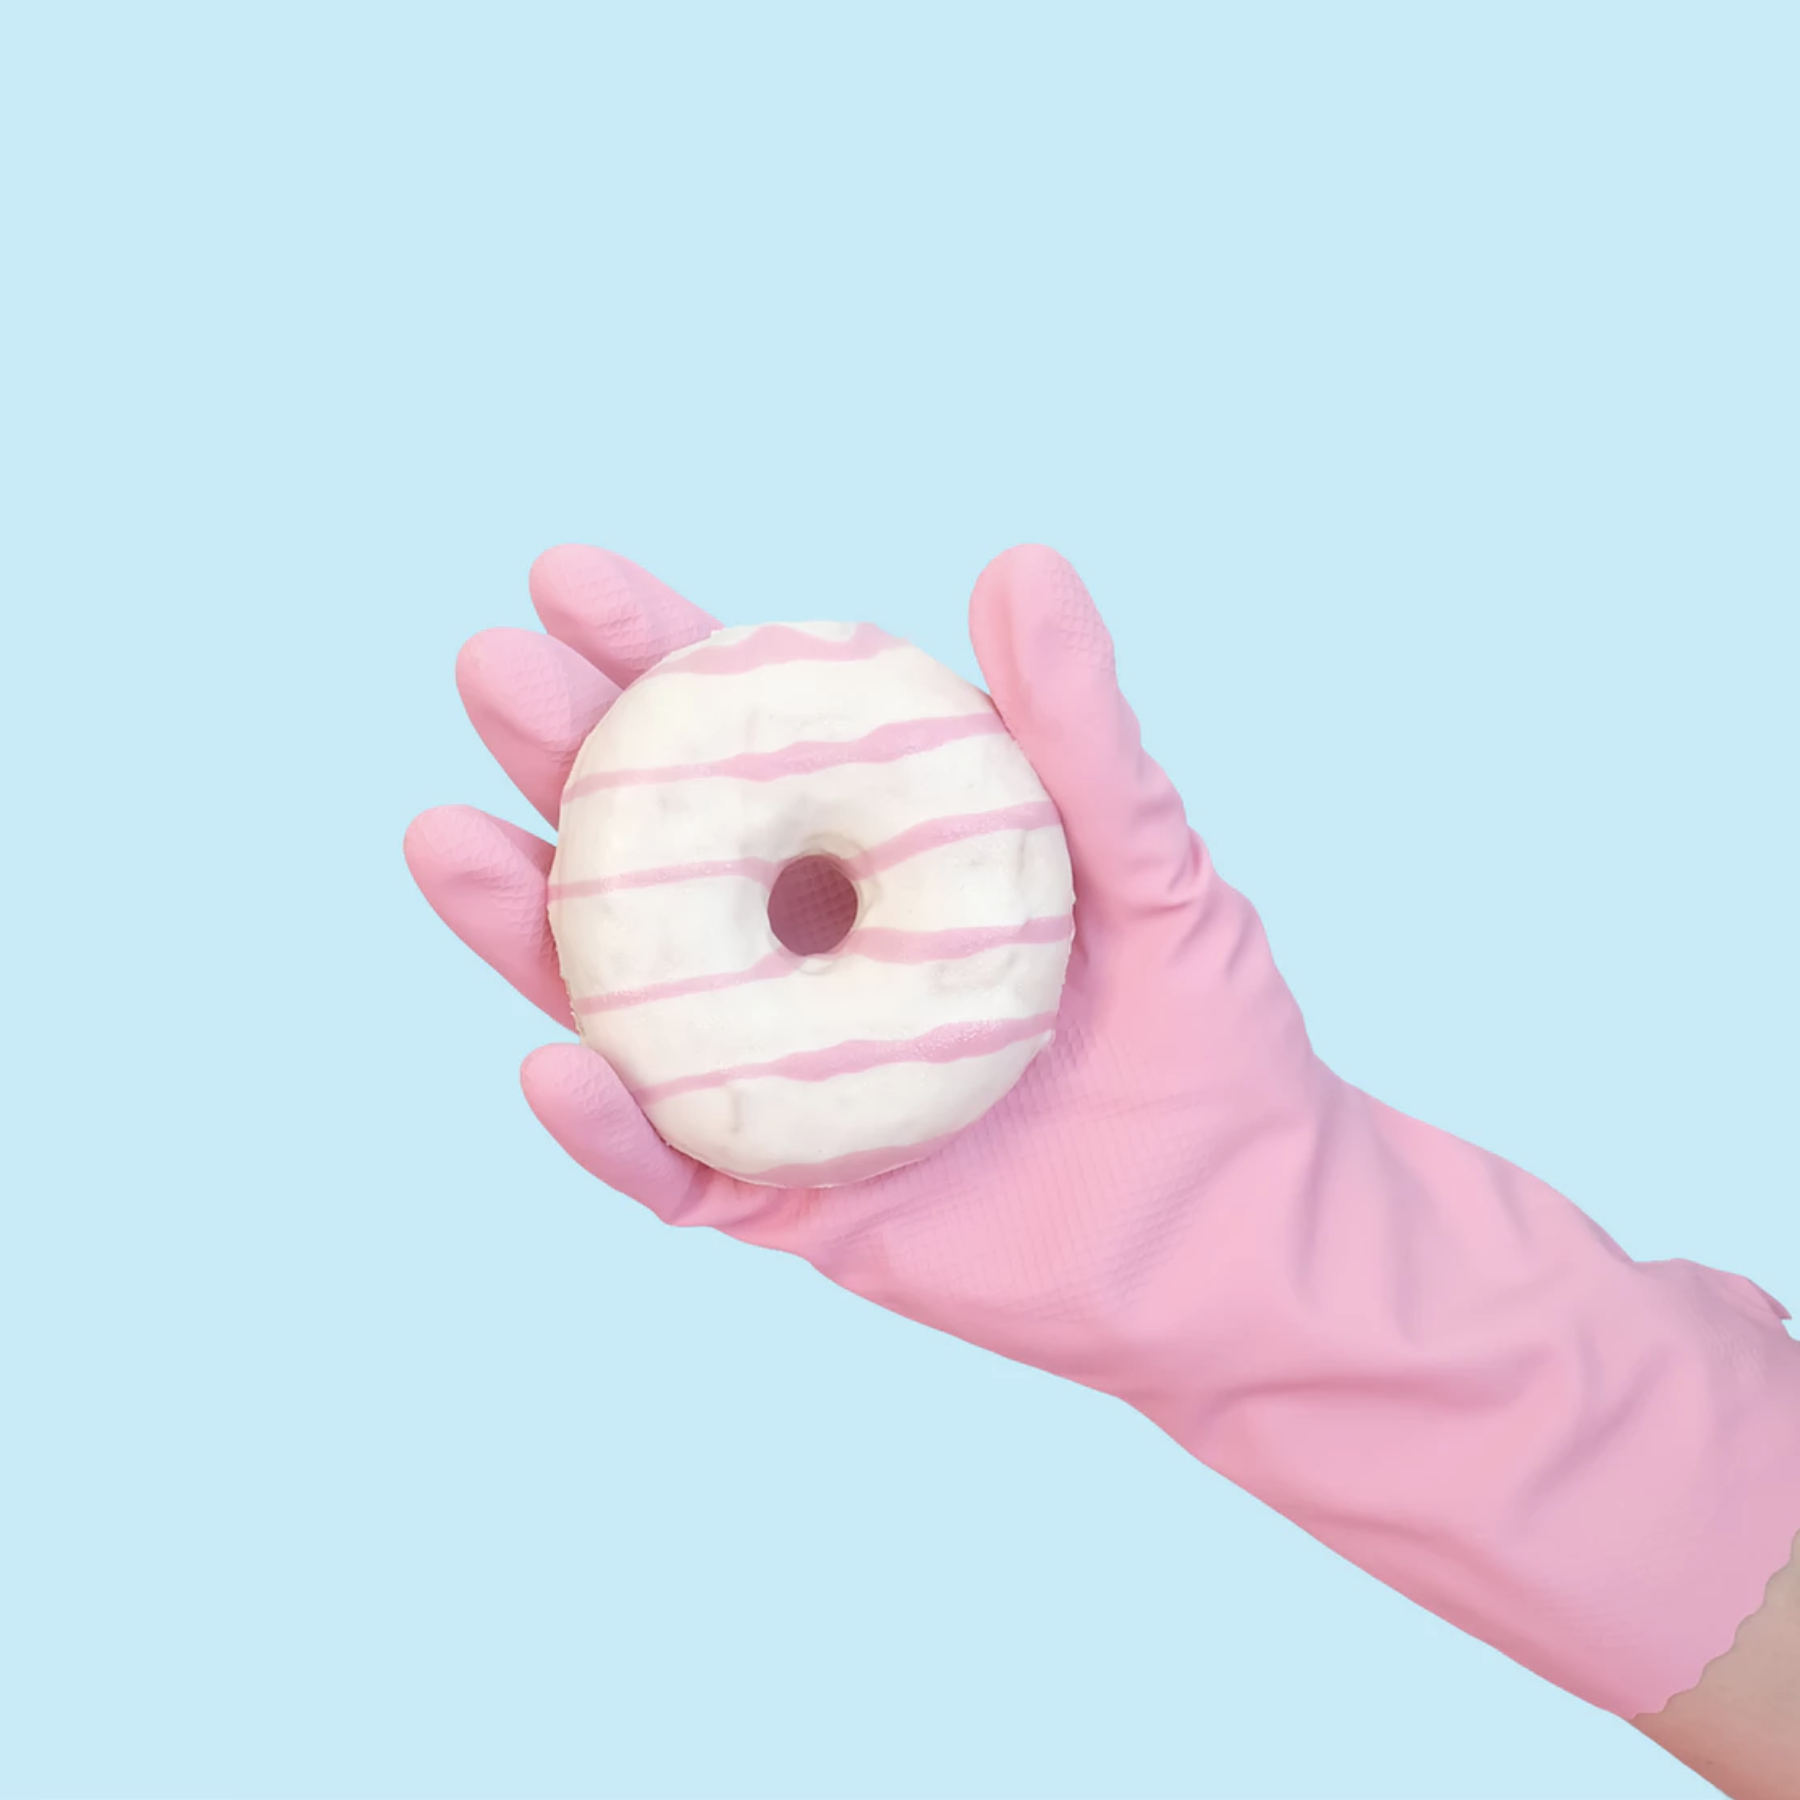 gloved hand holding a donut